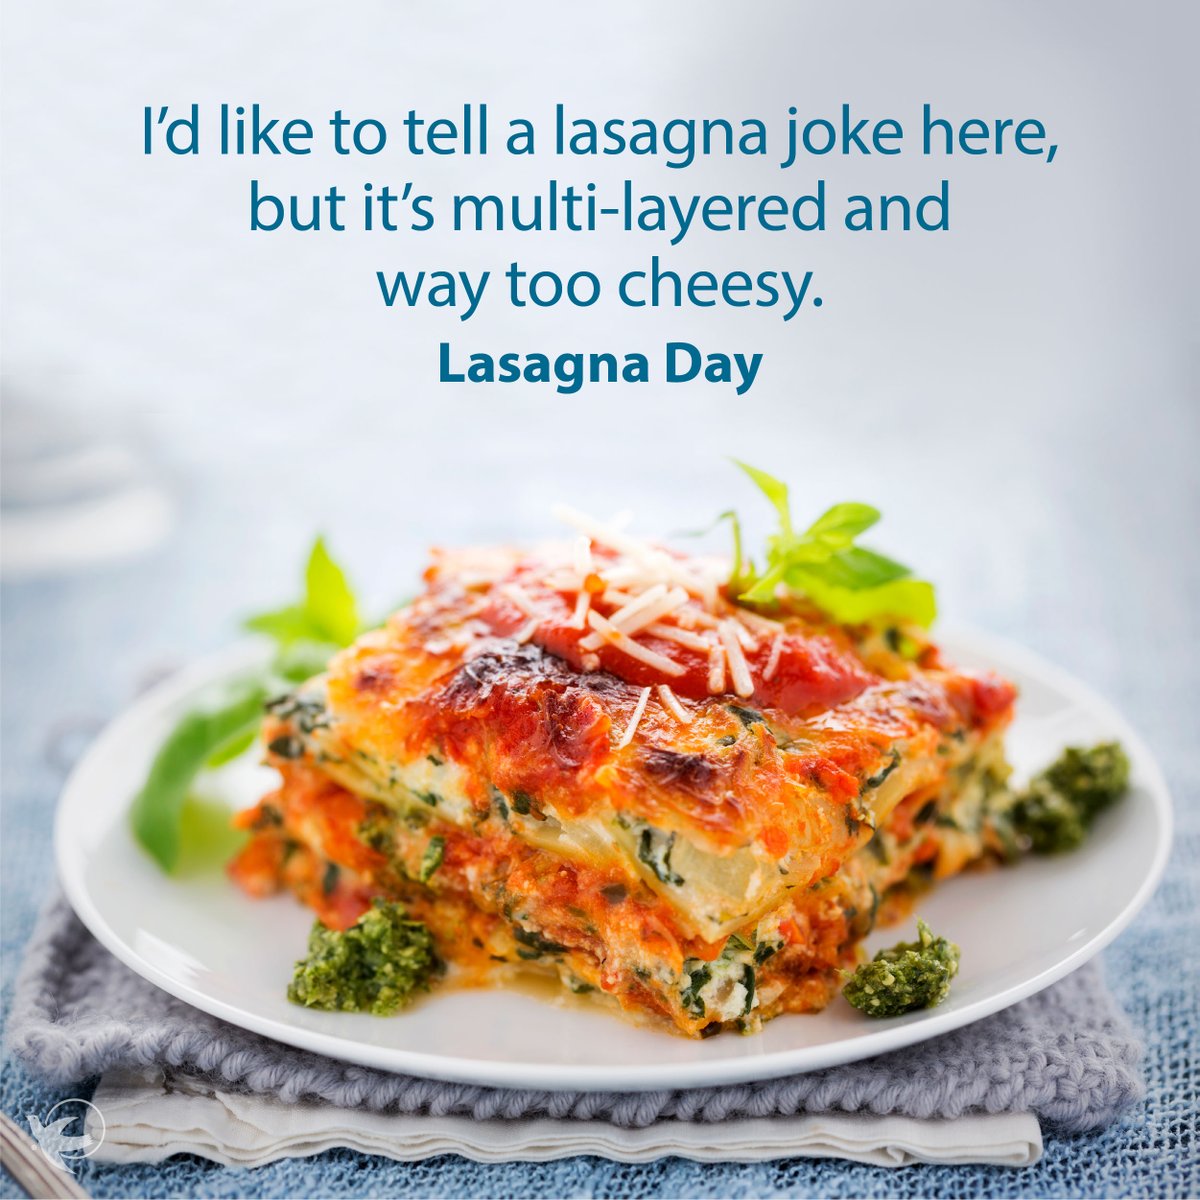 It's time to celebrate! 🎉🍝 Lasagna Day is here, so treat yourself to some delicious cheesy goodness. #LasagnaDay #CheesyGoodness #TreatYourself